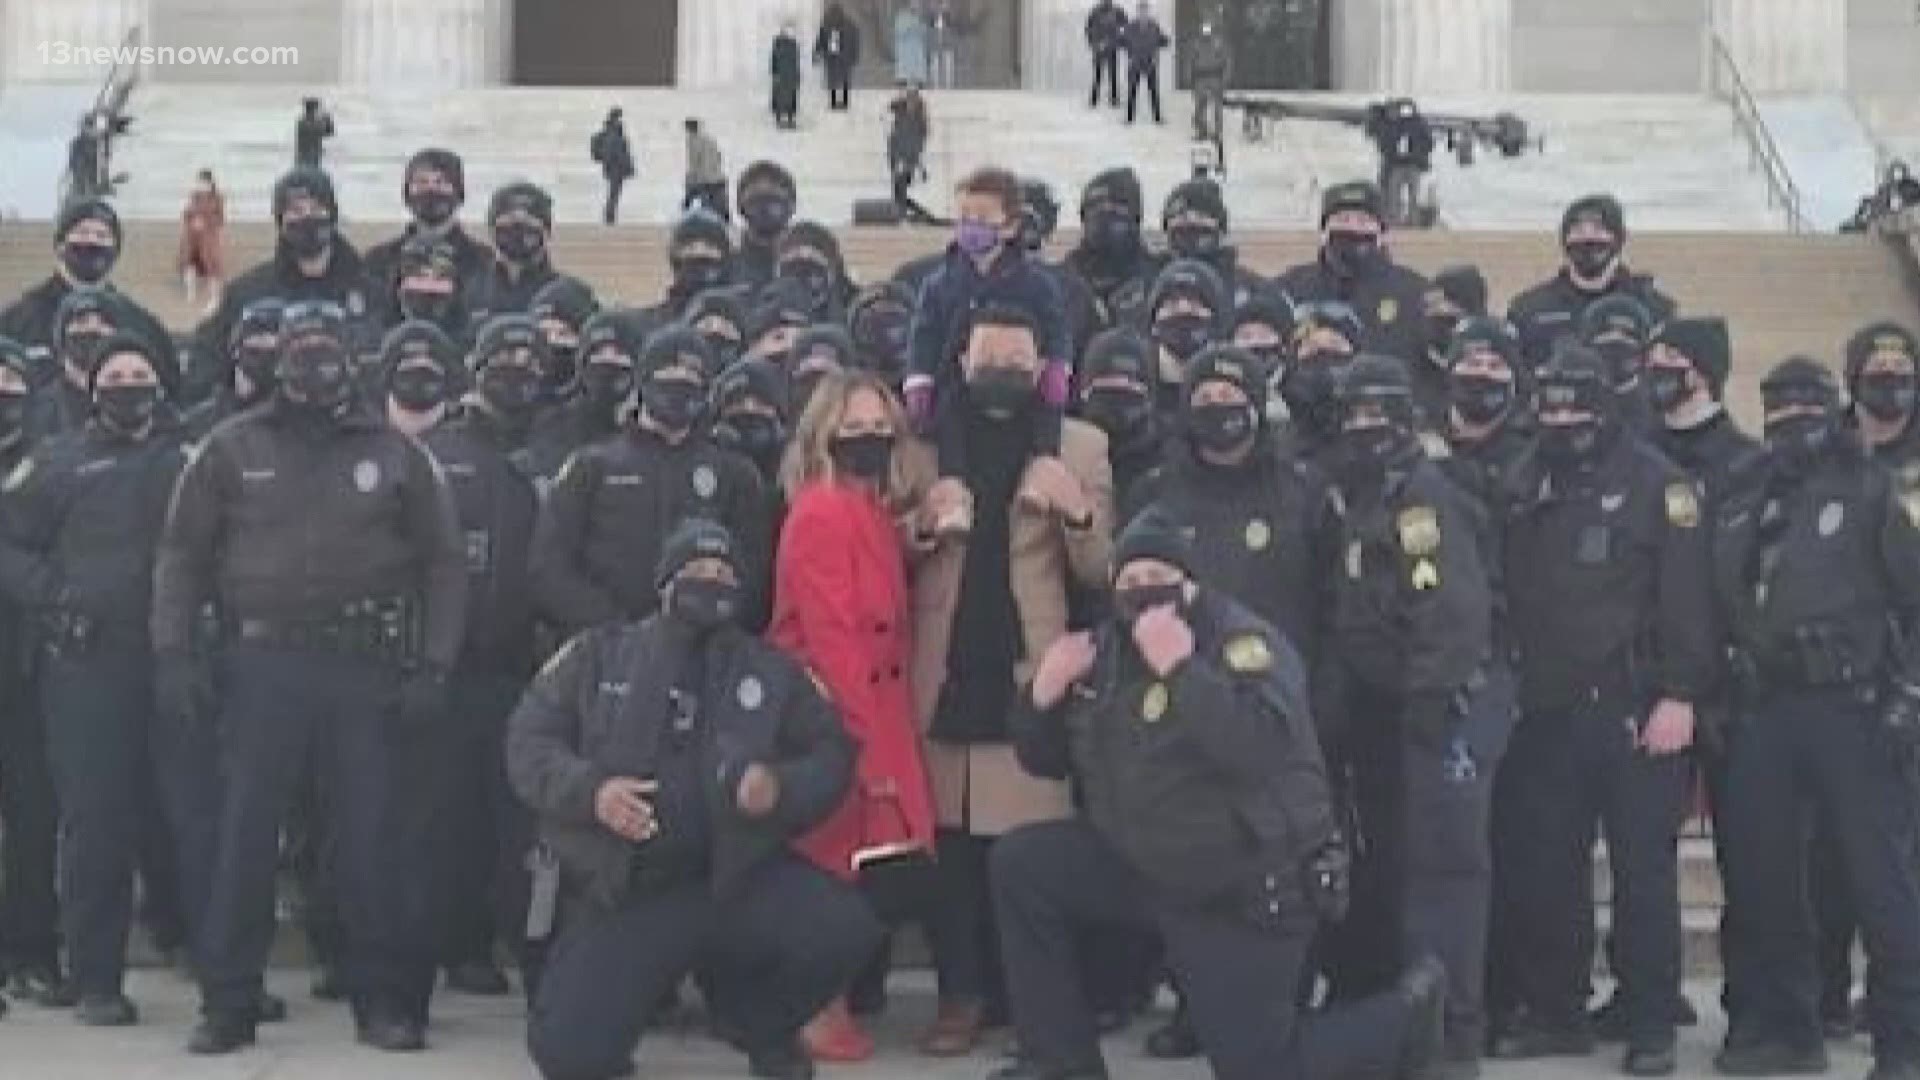 The trip to protect the Capitol was arranged months before Jan. 20. Oficers were continuously screened for COVID-19, and had a surprise encounter while sightseeing.